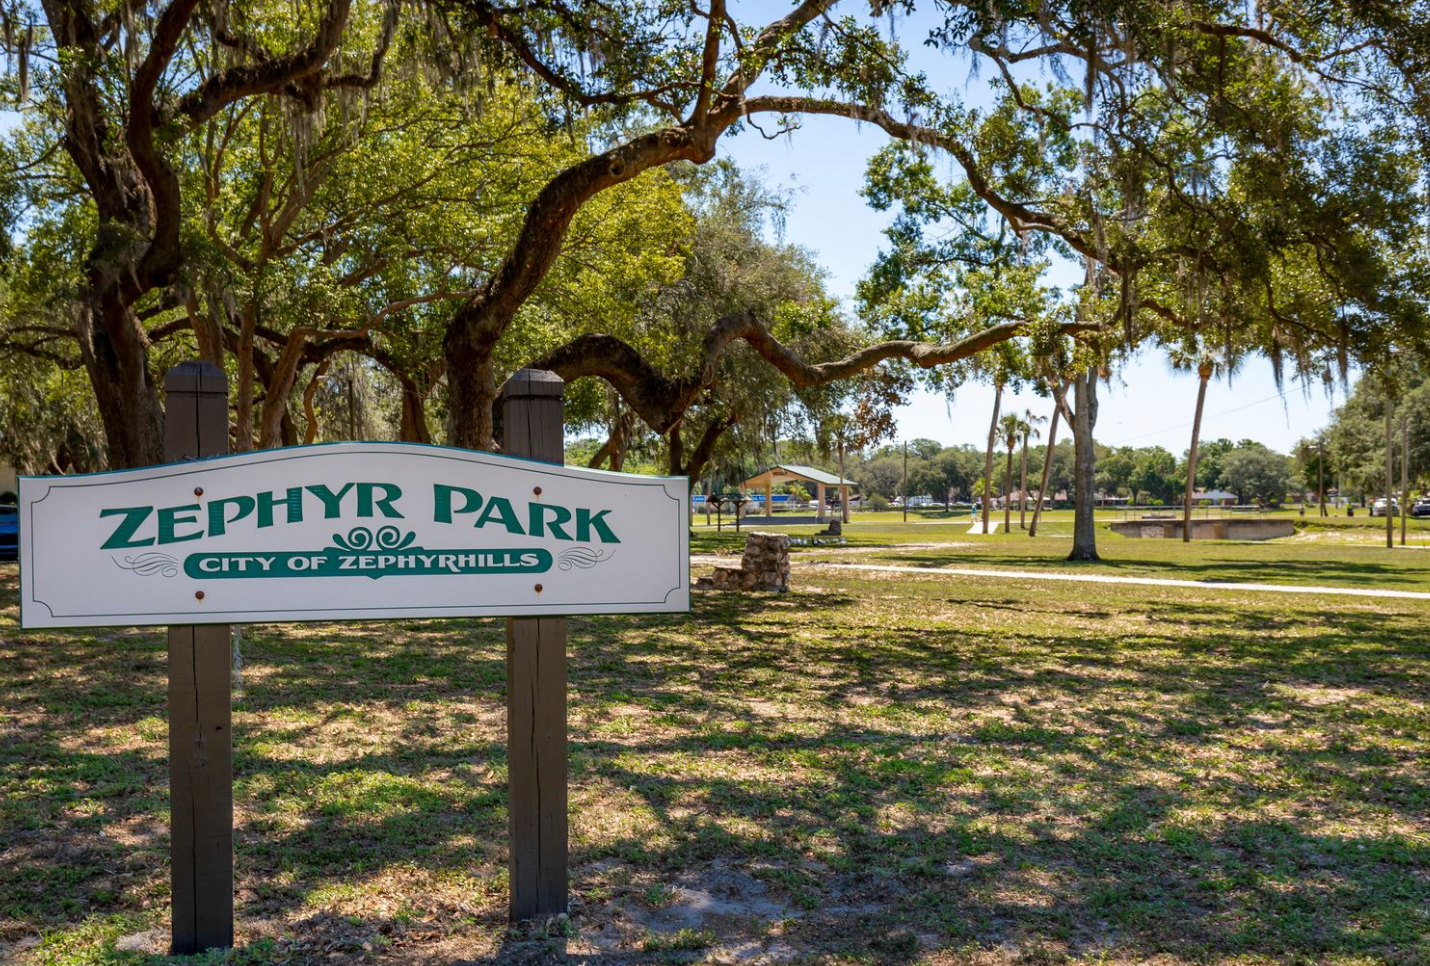 Zephyrhills sign by the city park